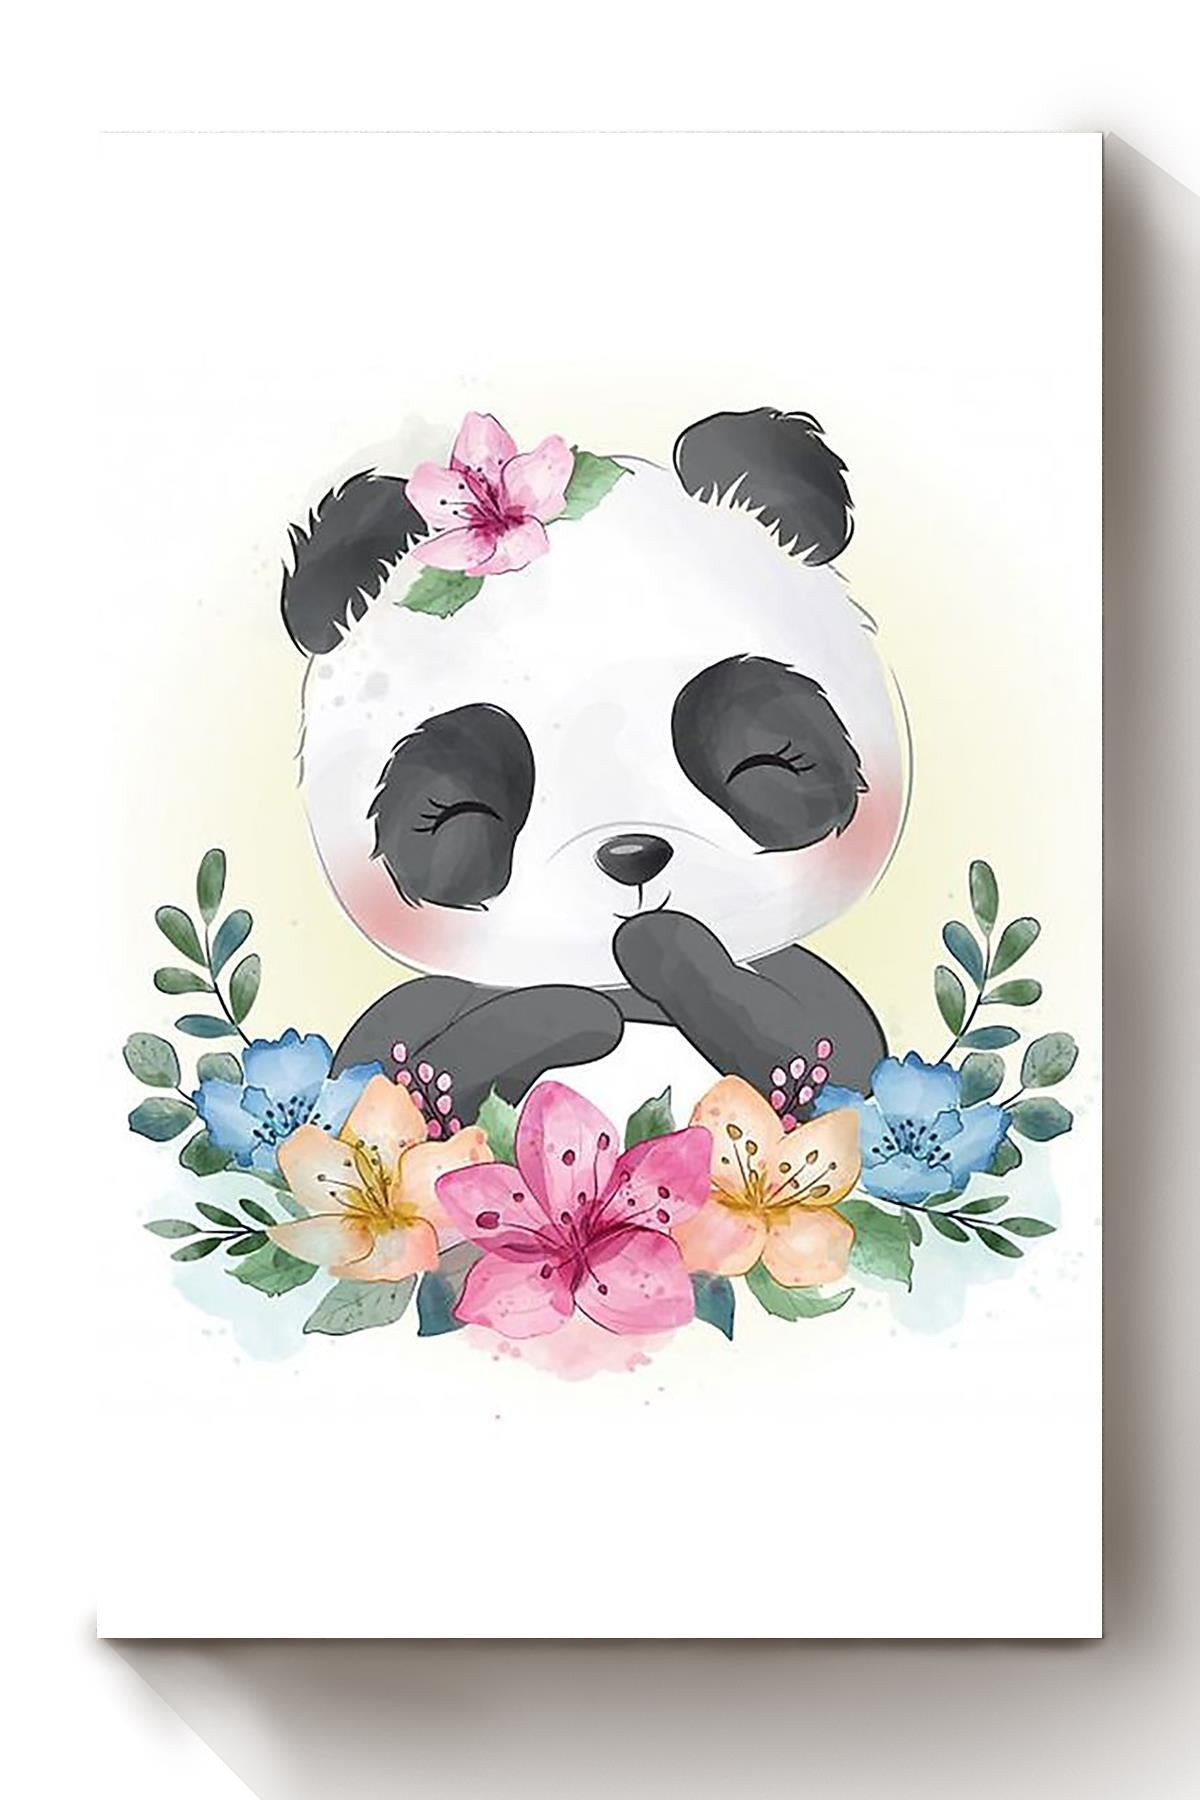 Baby Panda Smiling Watercolor Flower Gift For Chinese Friend Housewarming Canvas Framed Prints, Canvas Paintings Wrapped Canvas 8x10